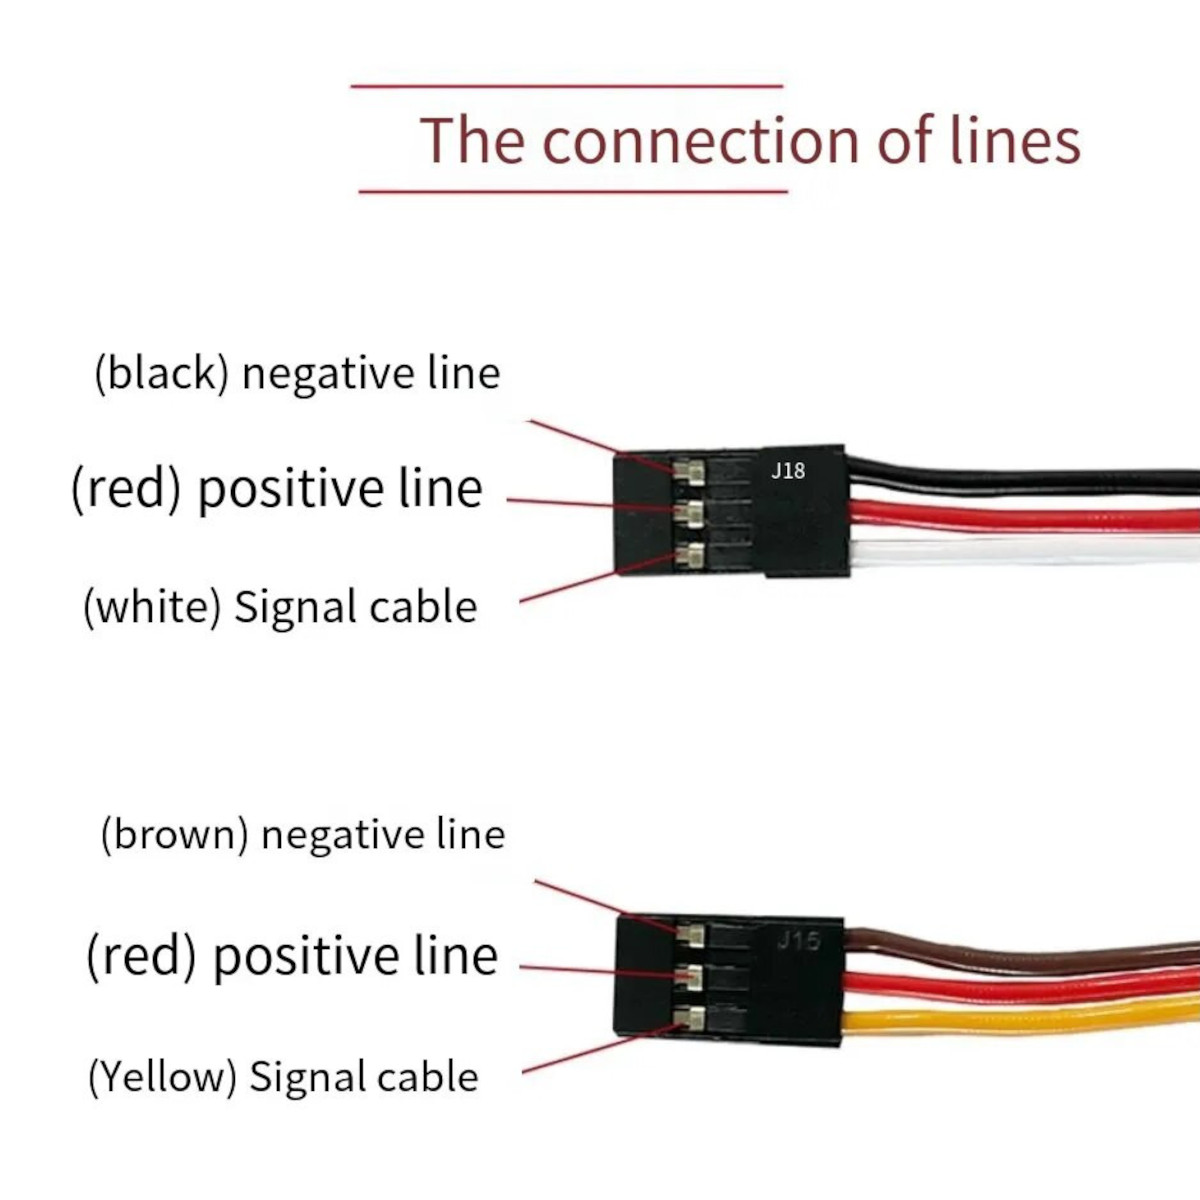 Wiring connections of lines